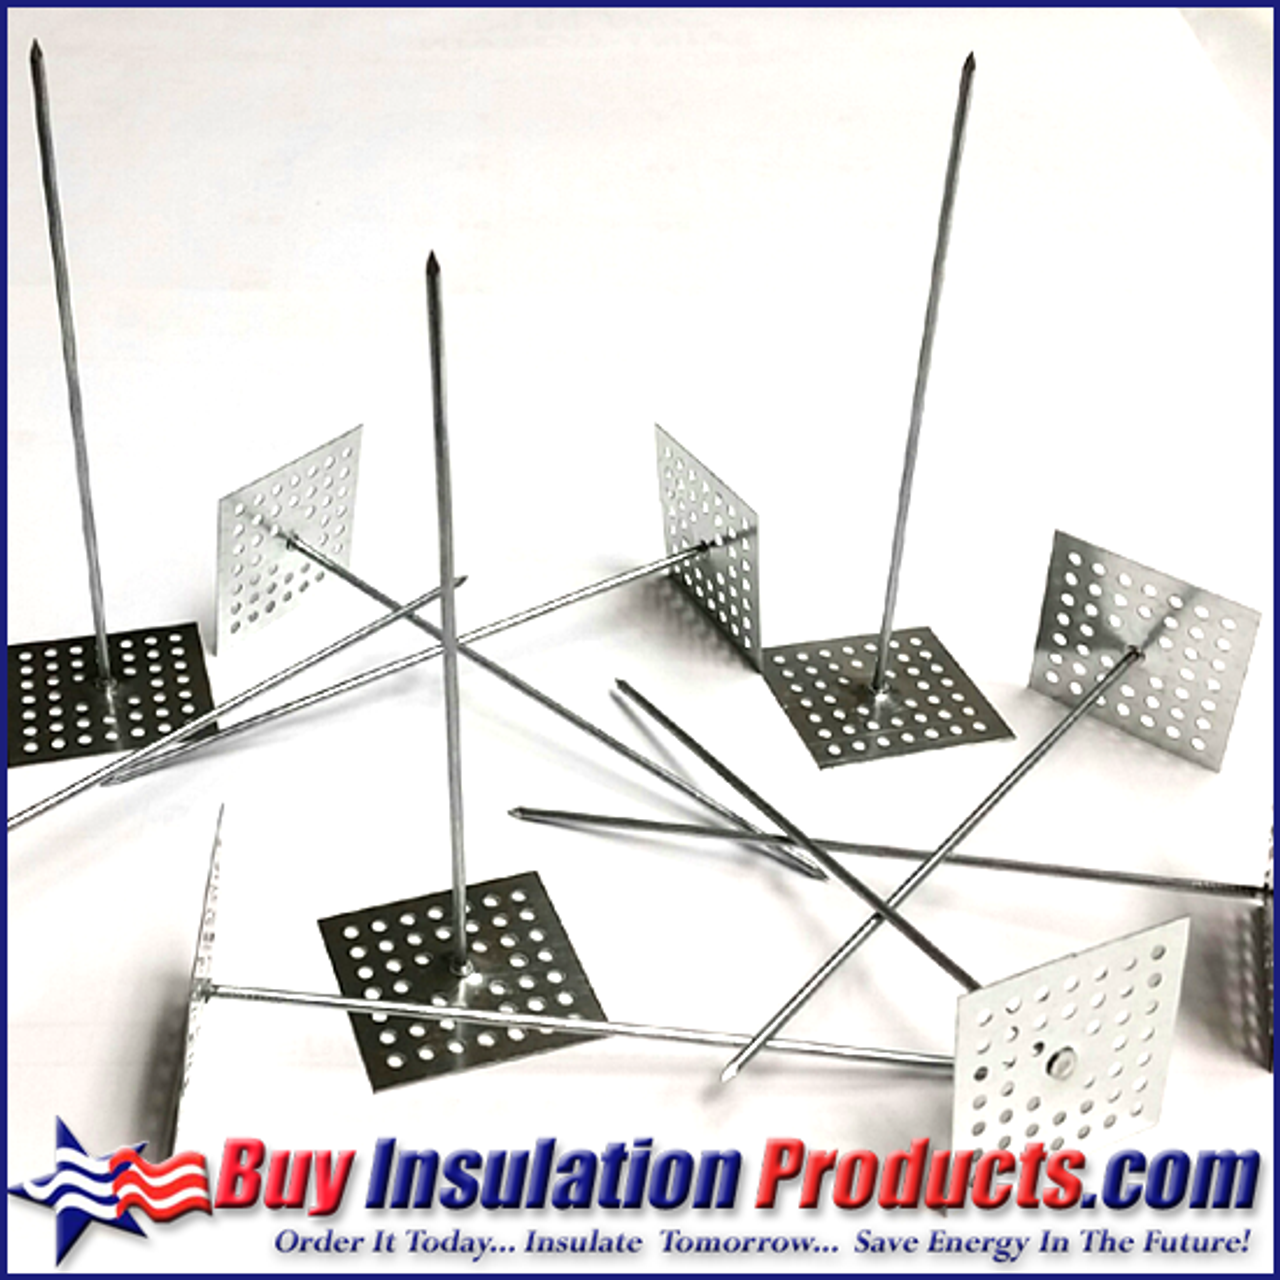 Gemco Insulation Pins - Perforated Base Insulation Hangers